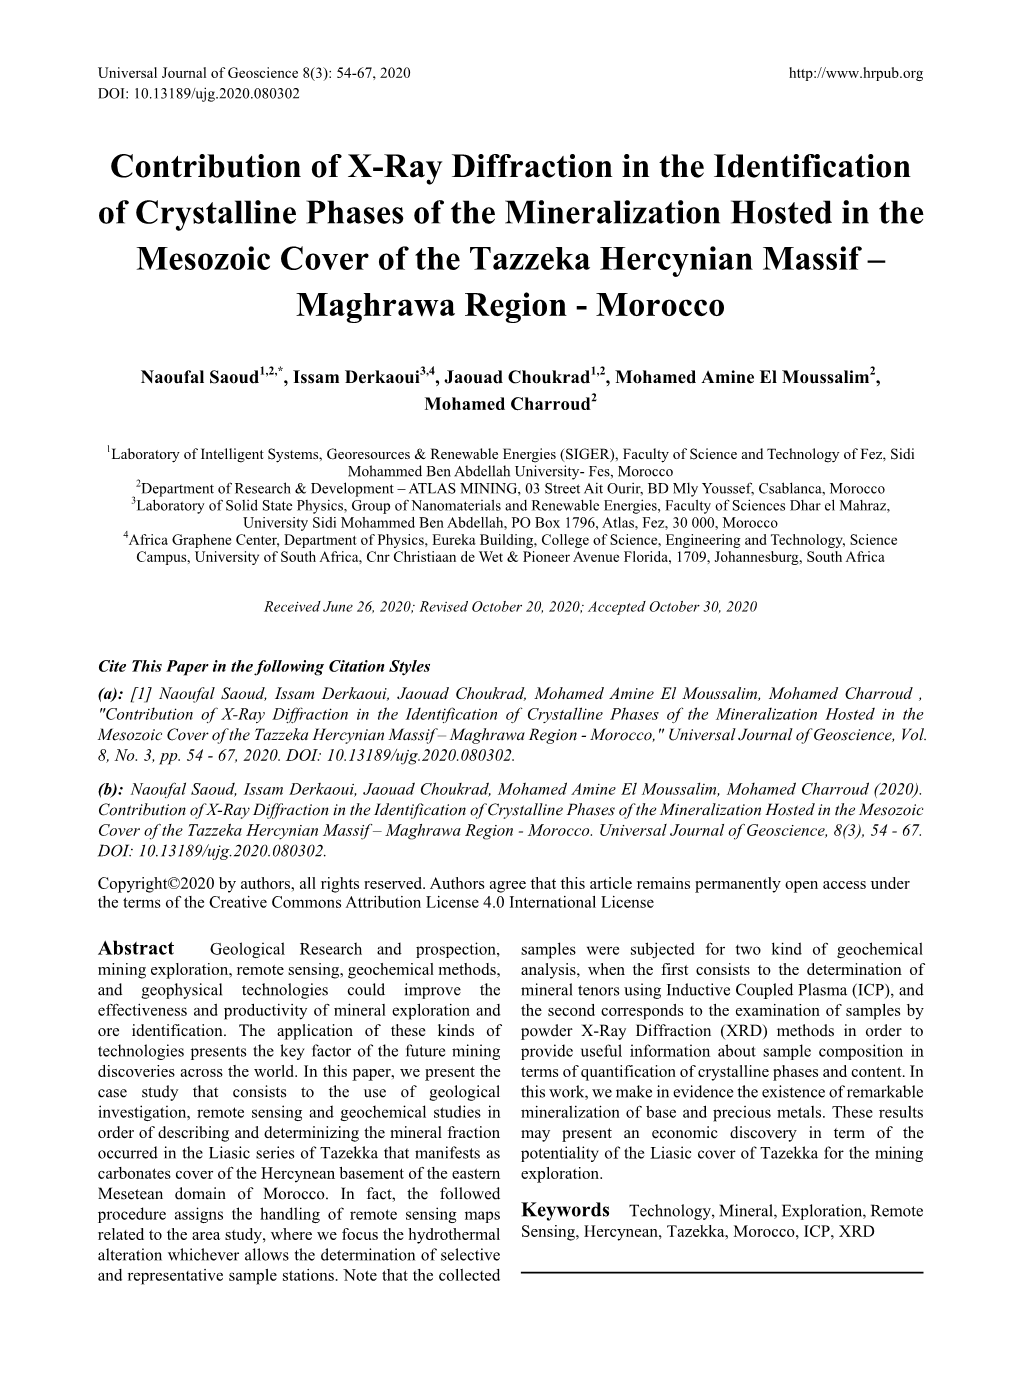 Contribution of X-Ray Diffraction in the Identification of Crystalline Phases